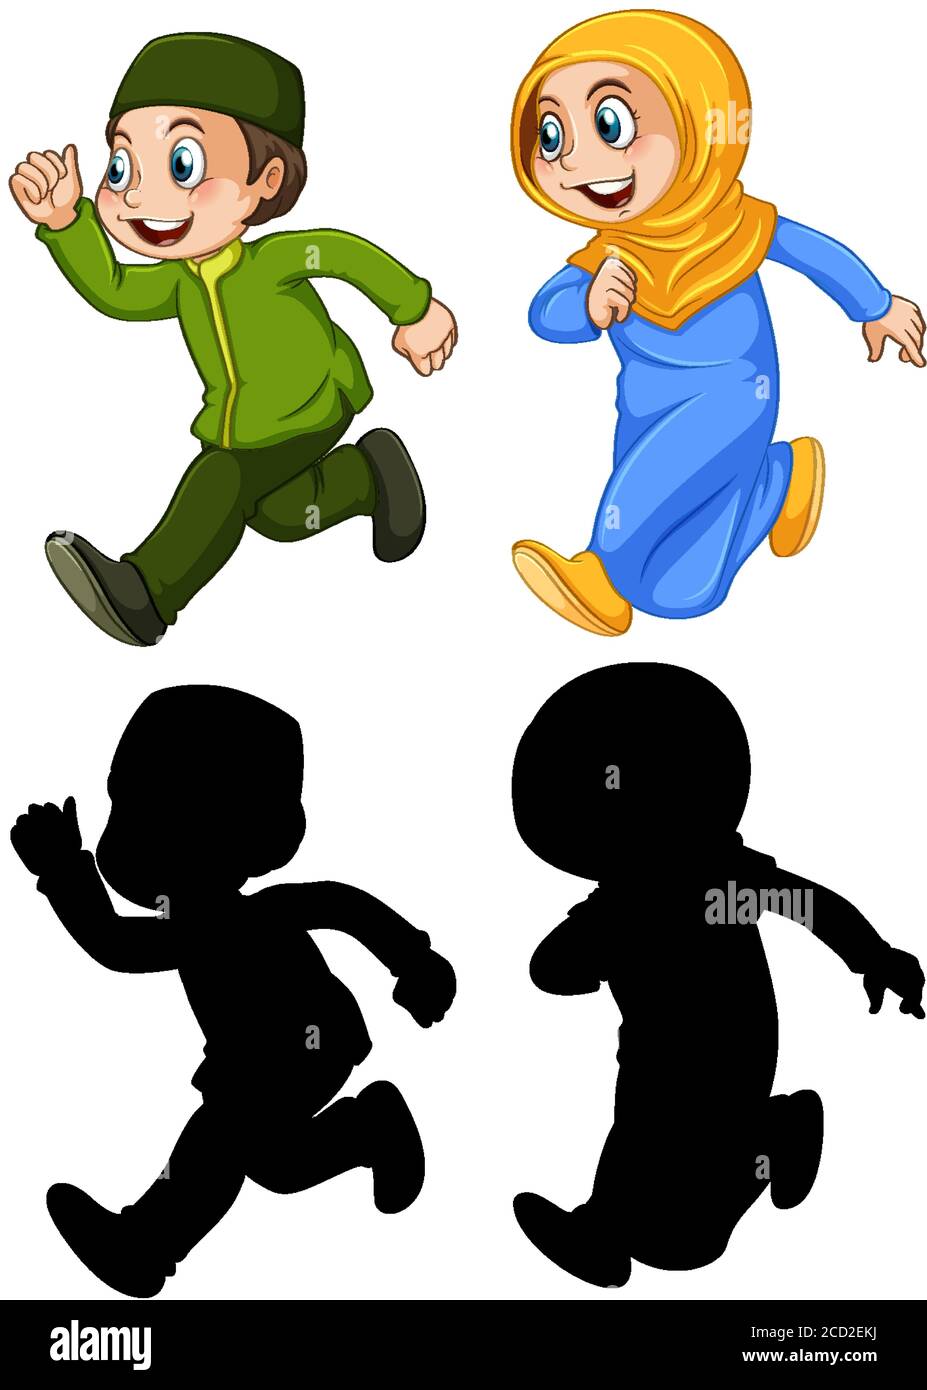 Arab Muslim Boy And Girl In Traditional Clothing In Color And Silhouette Isolated On White Background Illustration Stock Vector Image Art Alamy